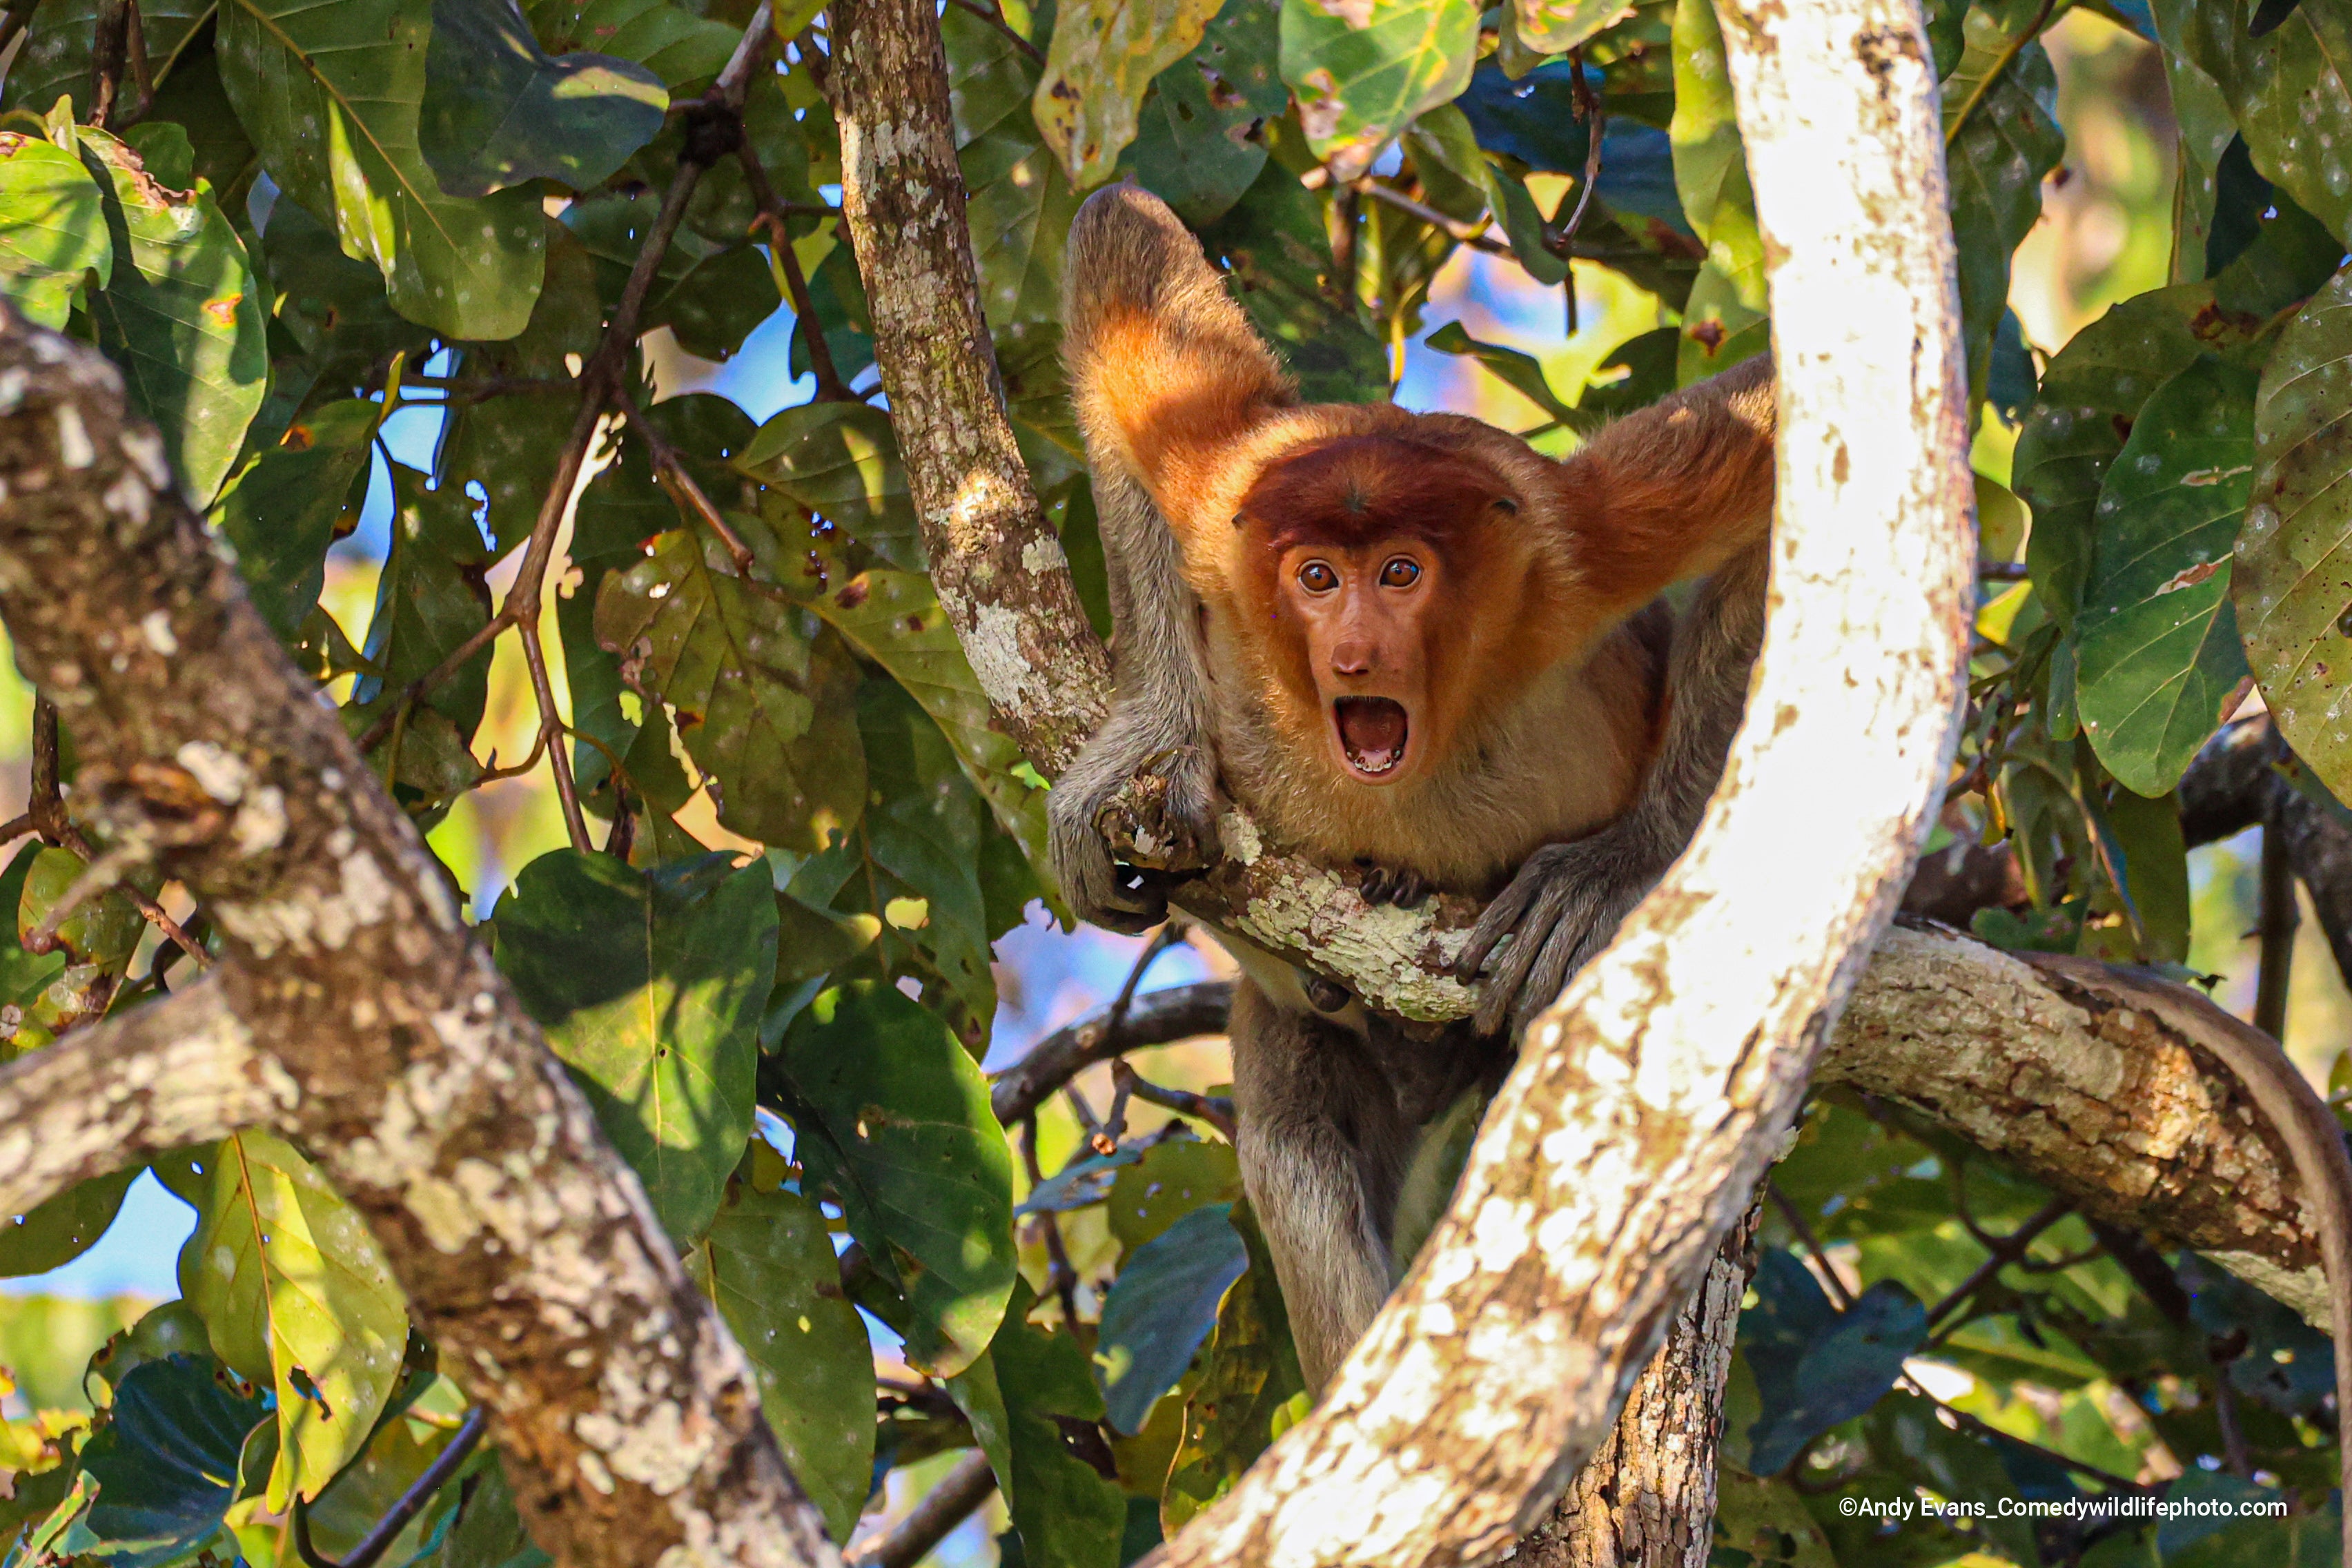 This probiscis monkey can't believe what it just heard. (Photo: ©  Andy Evans / Comedywildlifephoto.com.)